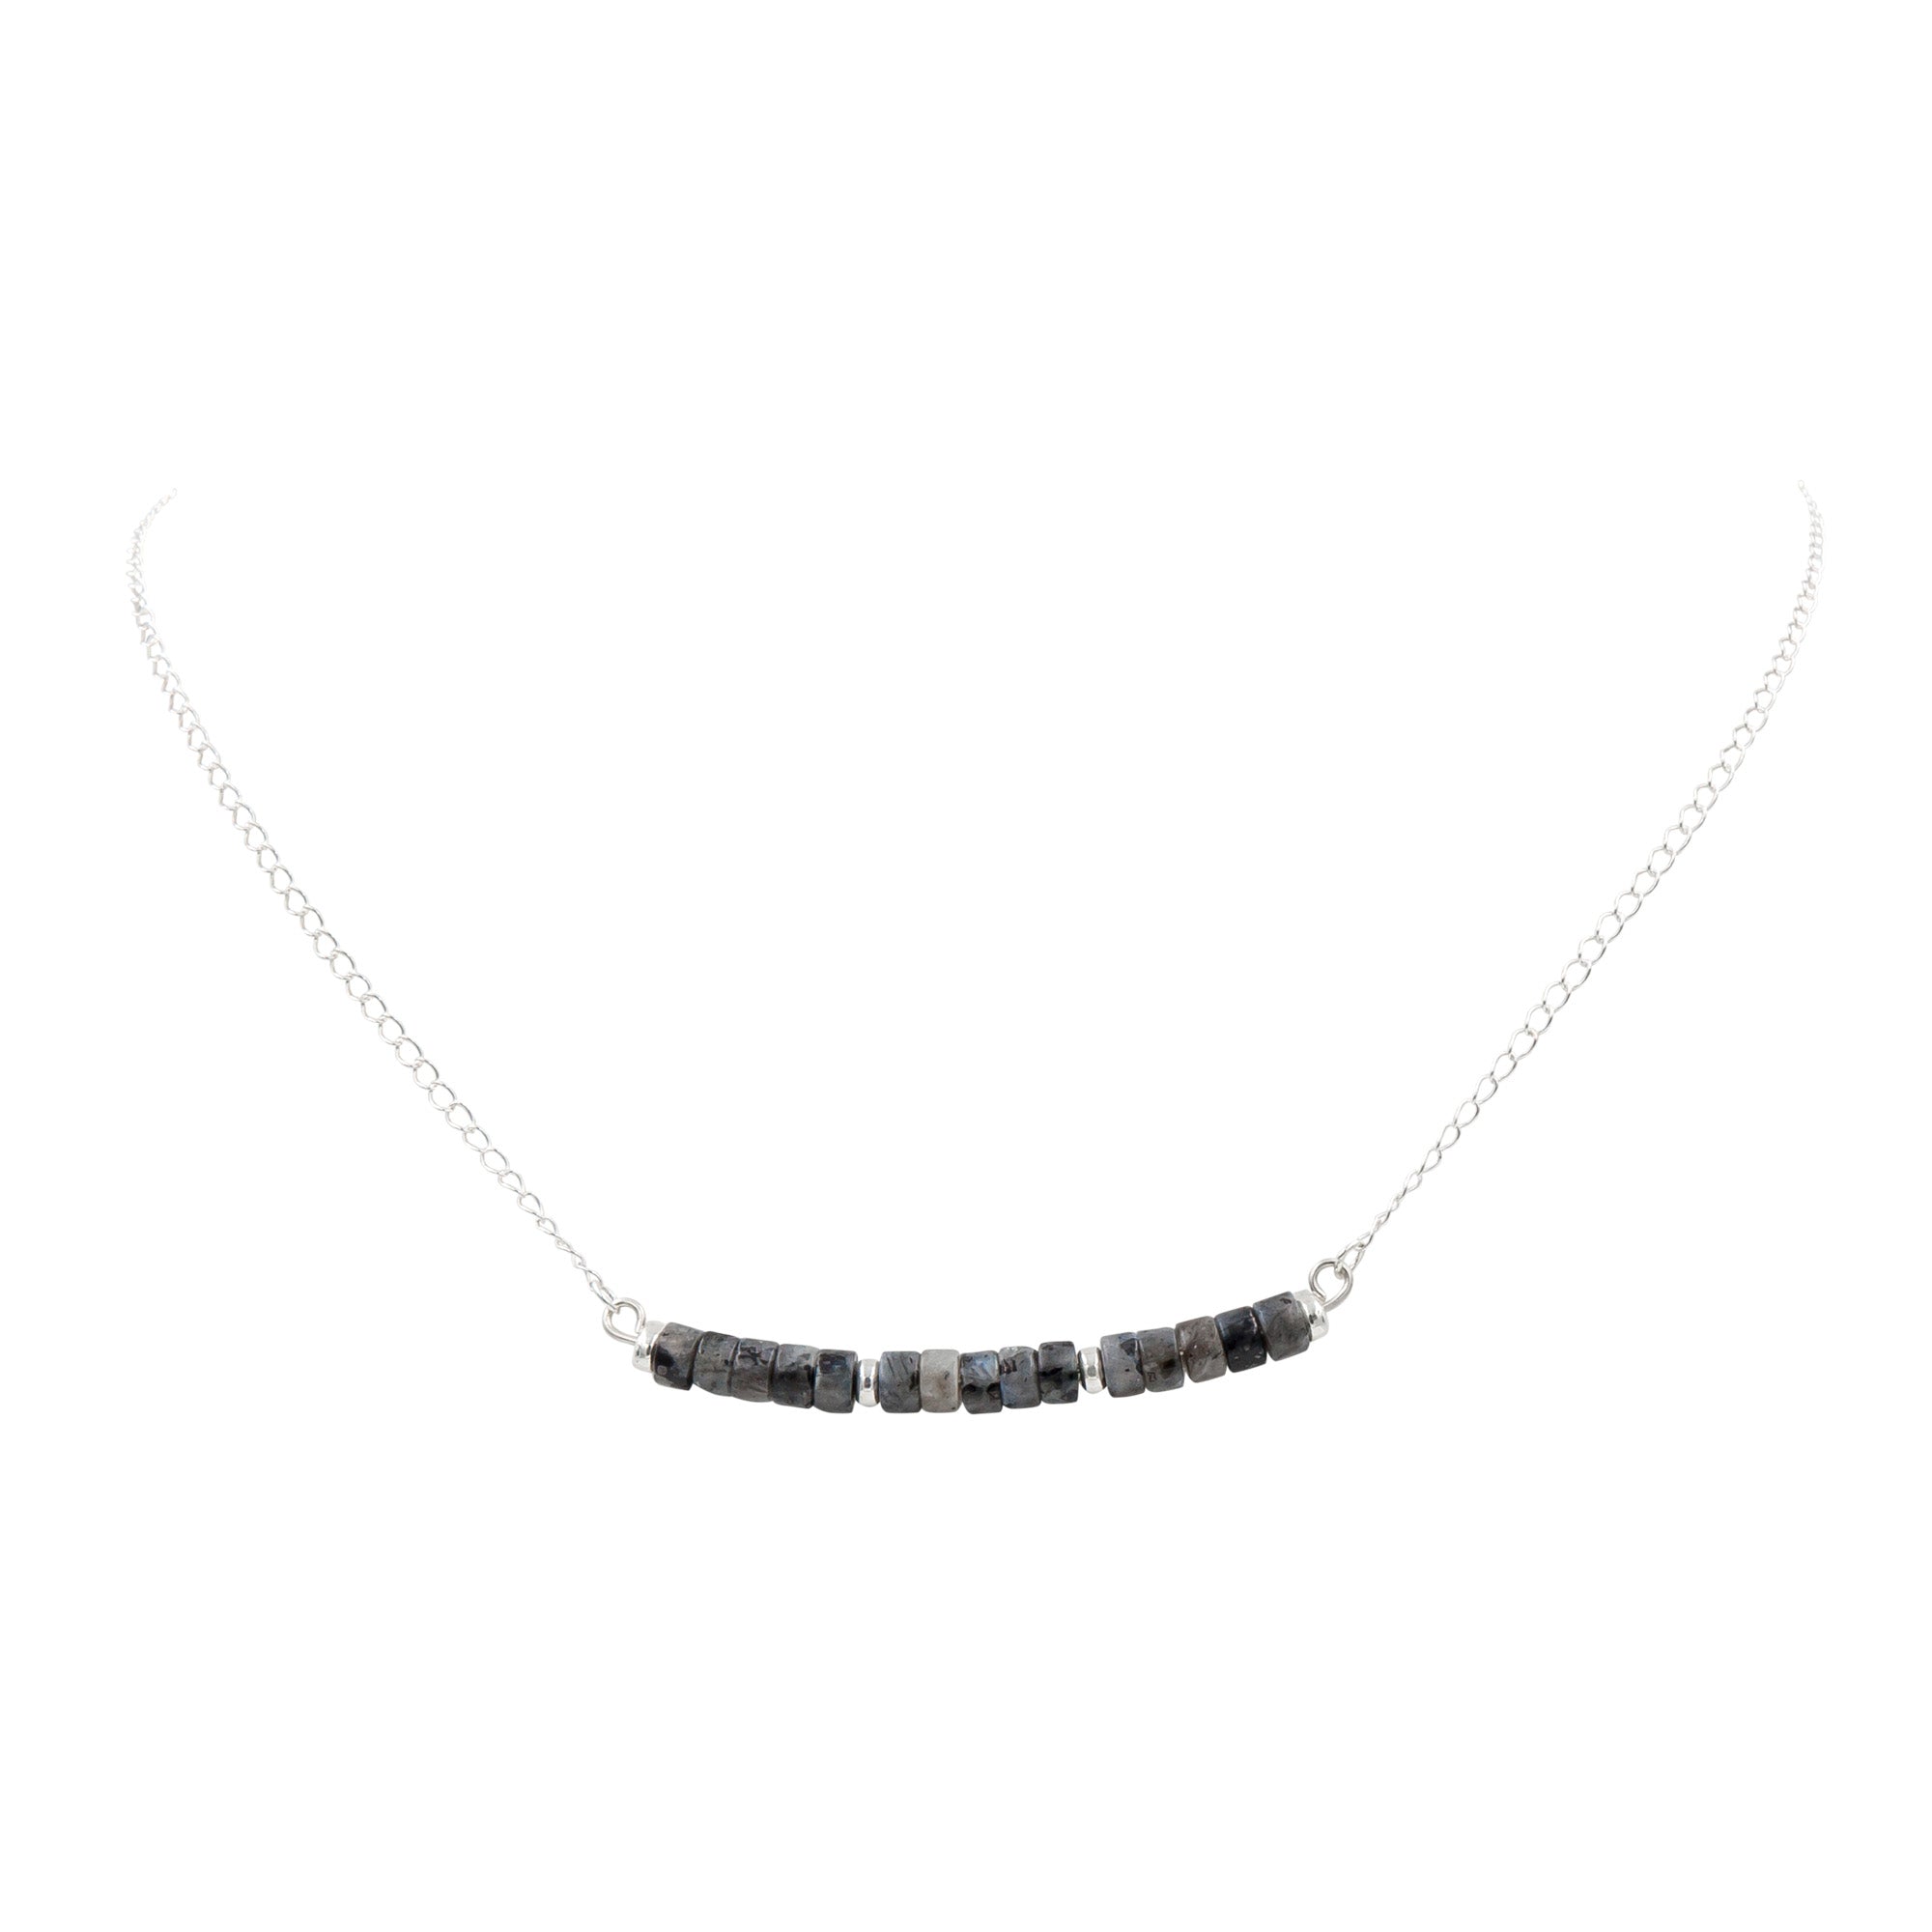 Earth Song Jewelry ~  Iridescent Larvikites (Black Moonstone) is strung on Sterling Silver - glowing softly around your neckline.